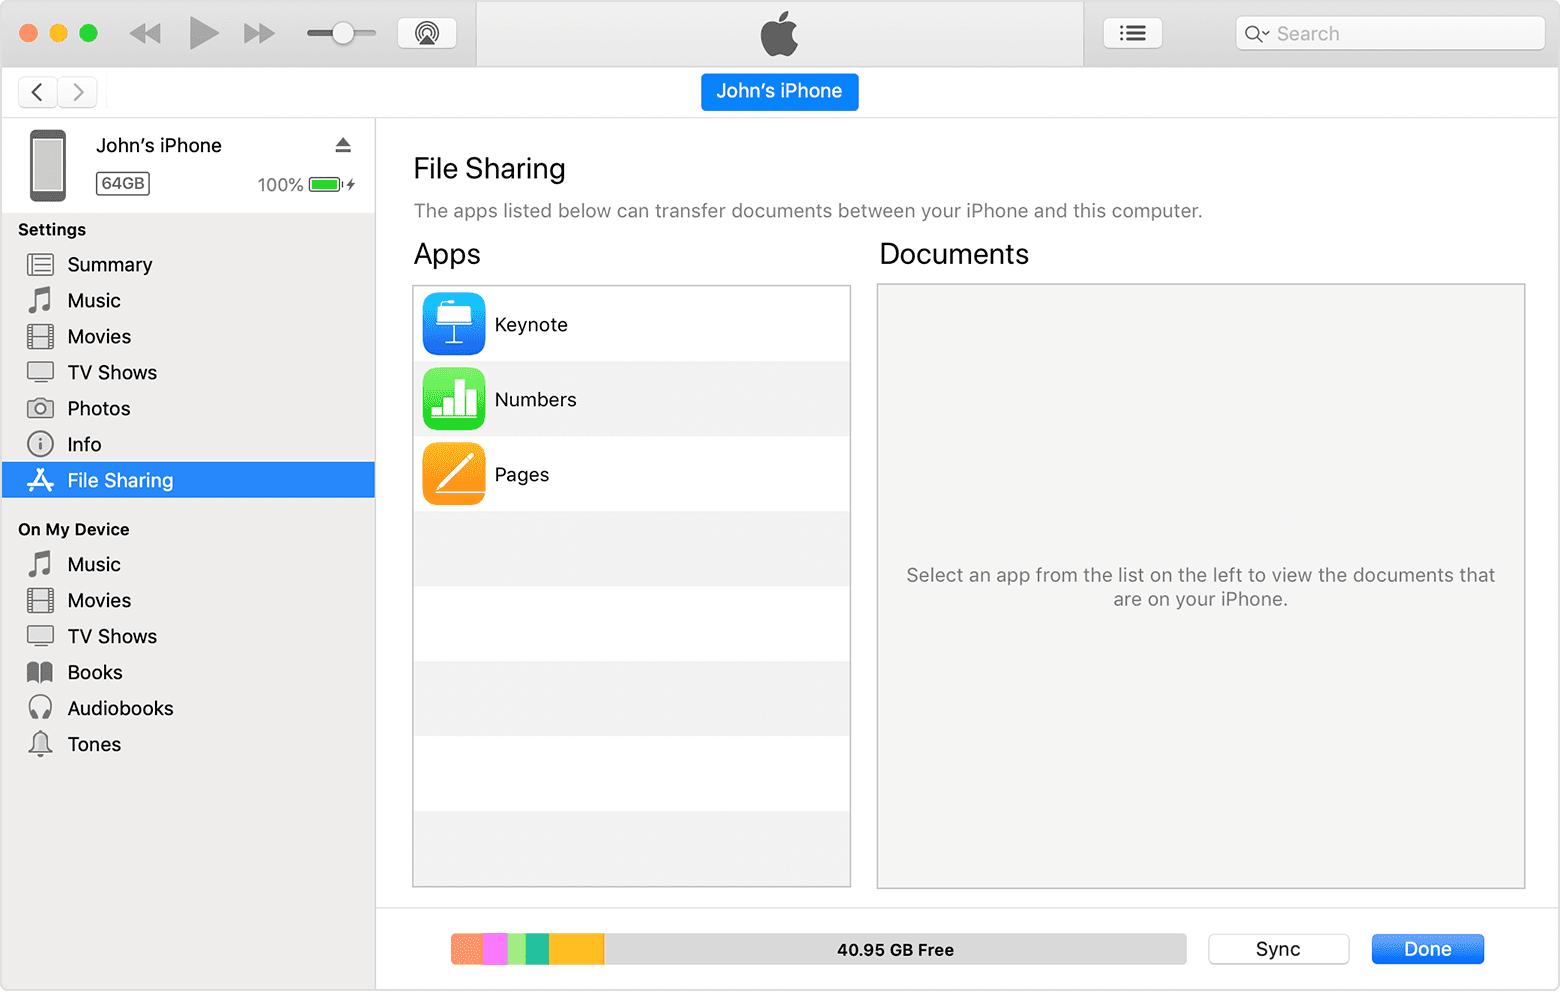 Transfer files between your iOS device and computer using AirDrop or other file-sharing apps.
Use the Files app on your iOS device to access and manage files stored on cloud services like iCloud Drive, Dropbox, or Google Drive.